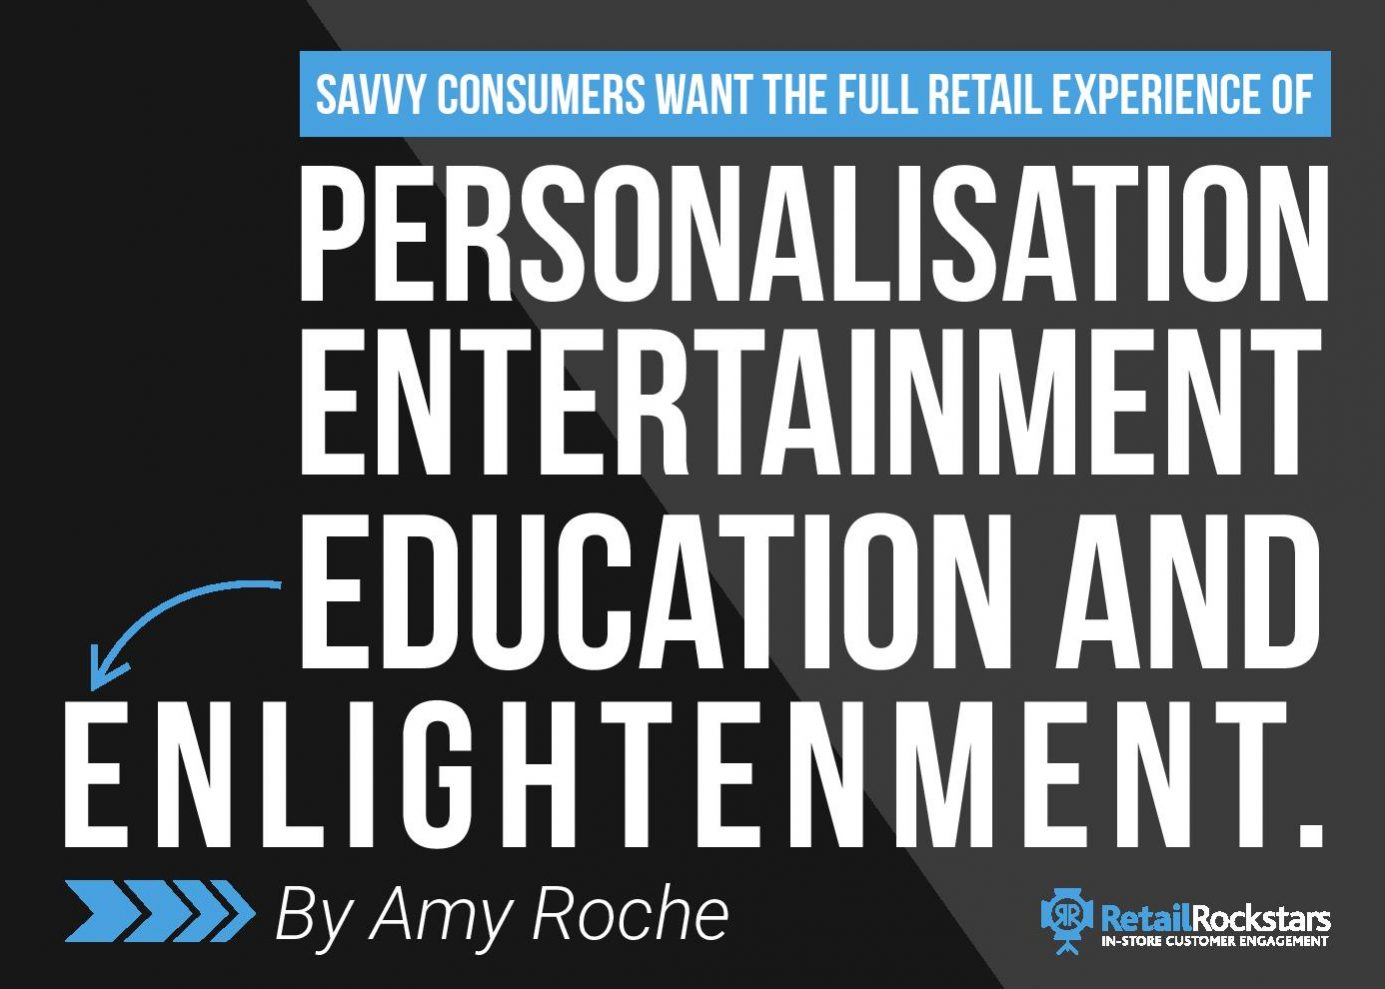 retail experience, in-store experience, customer experience, personalisation, entertainment, enlightenment